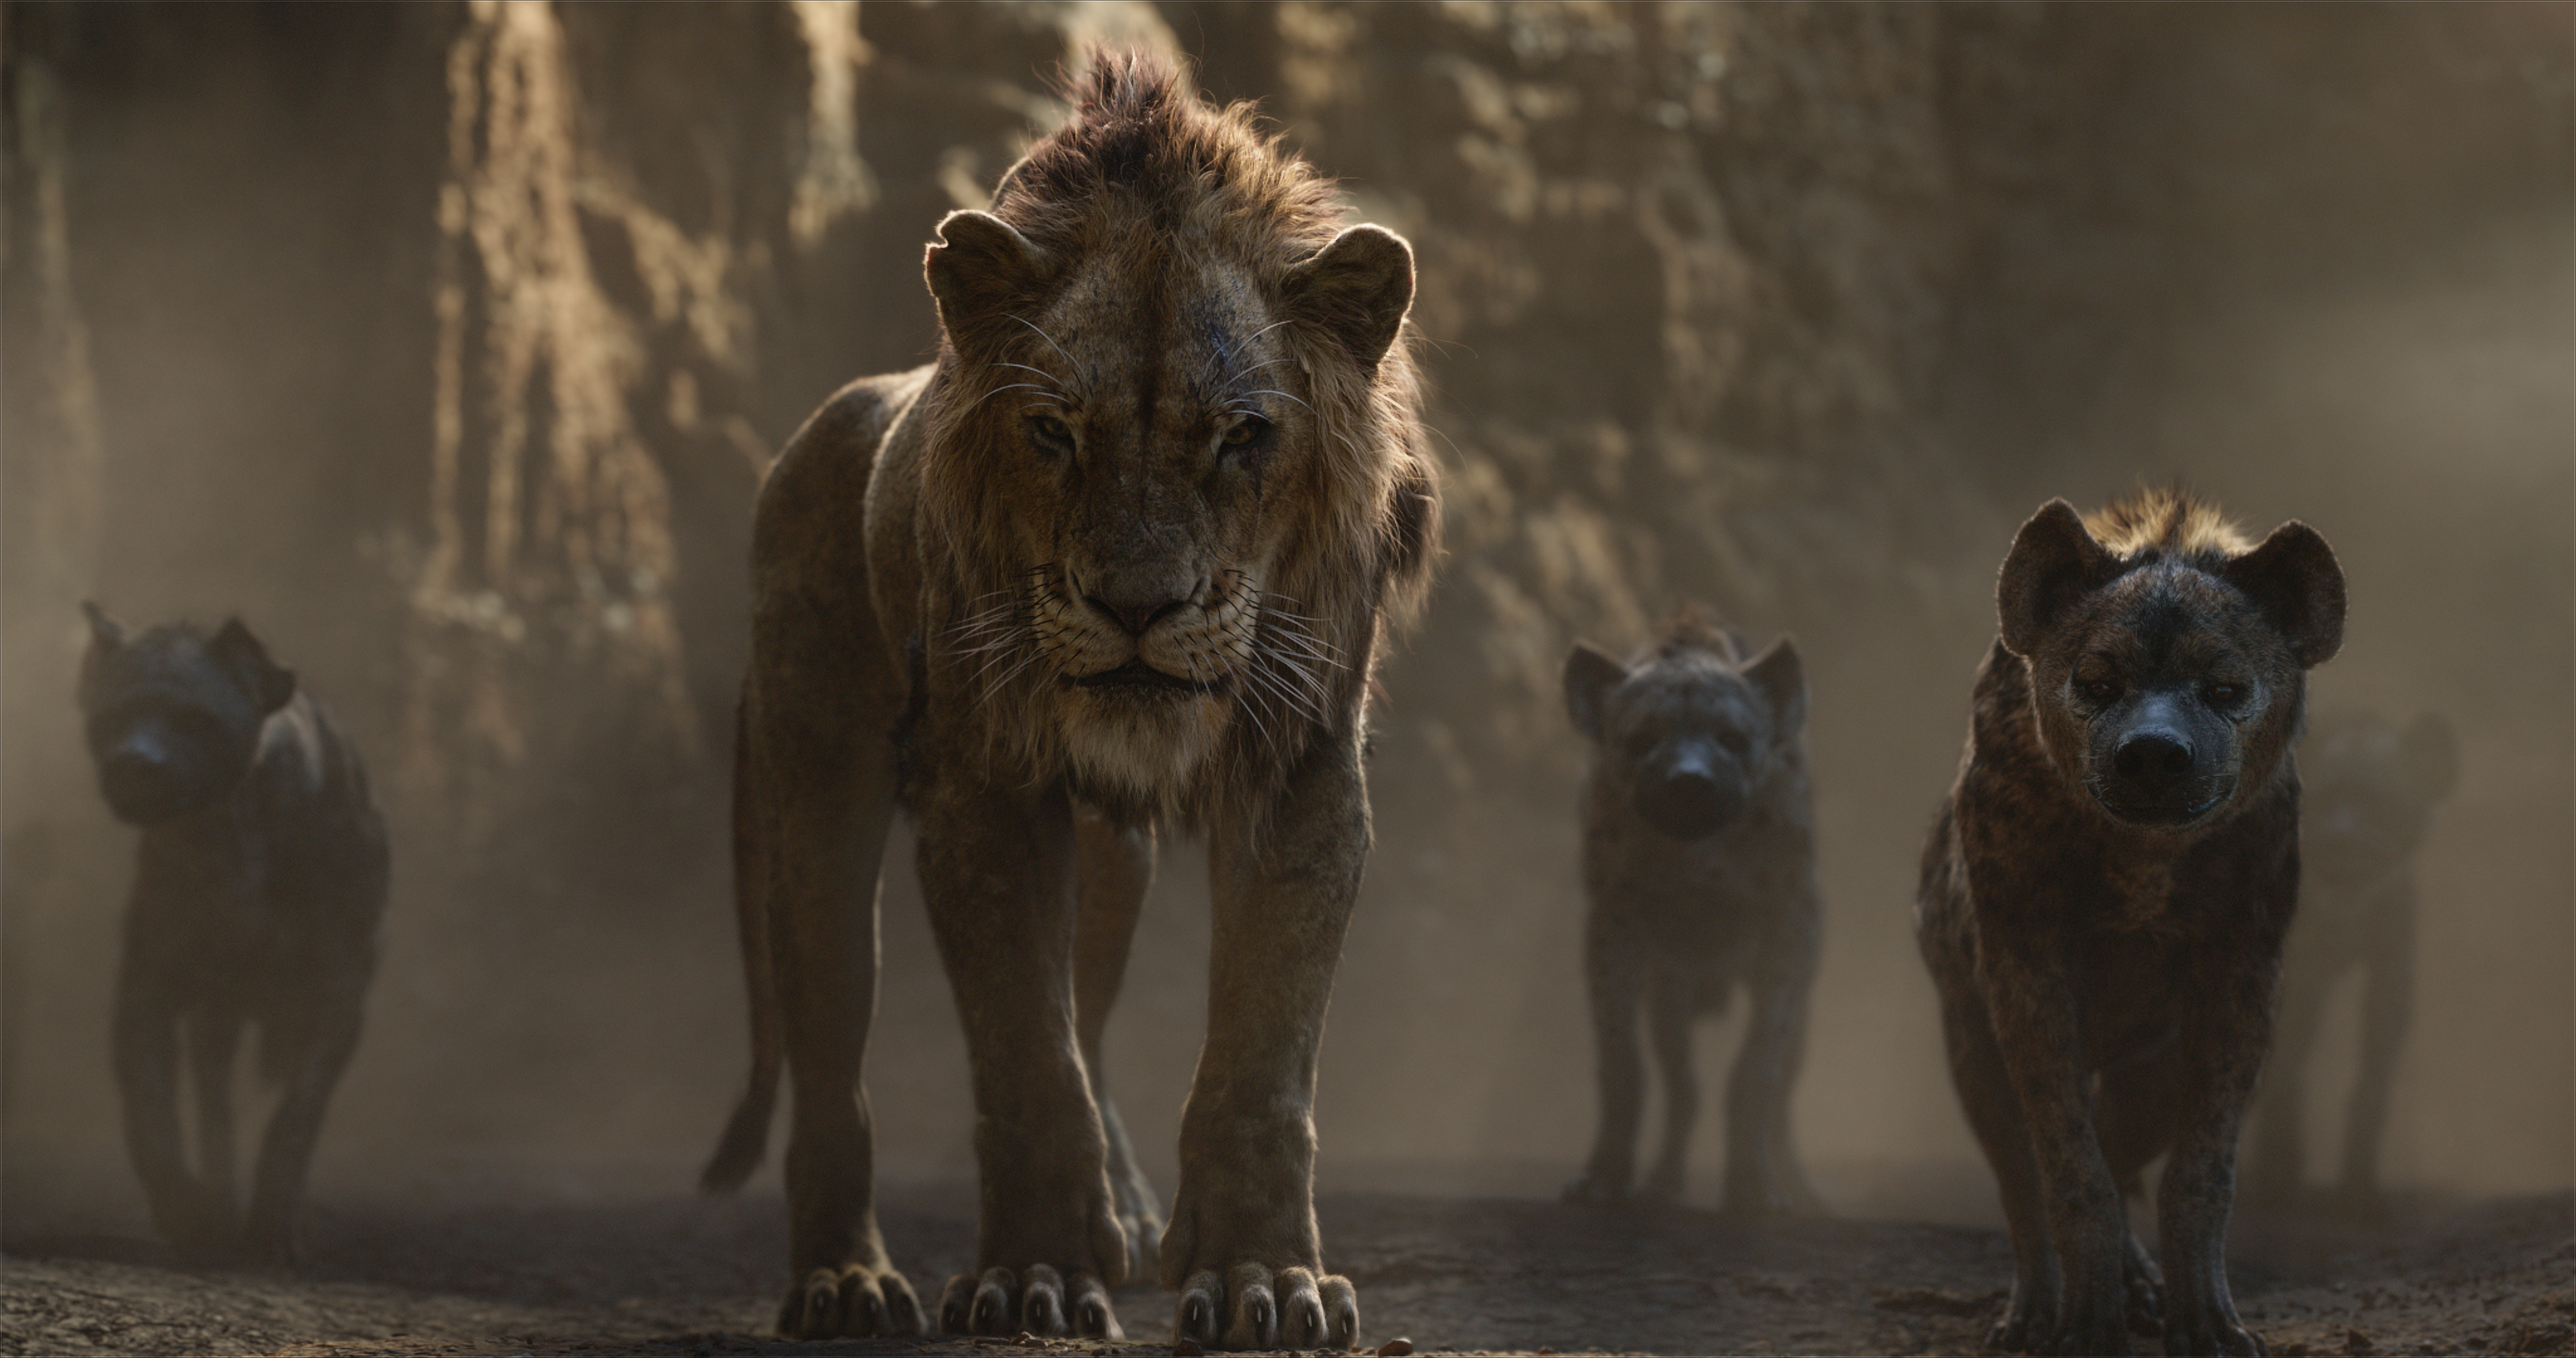 Here's How the New 'Lion King' Differs From the Original | Time